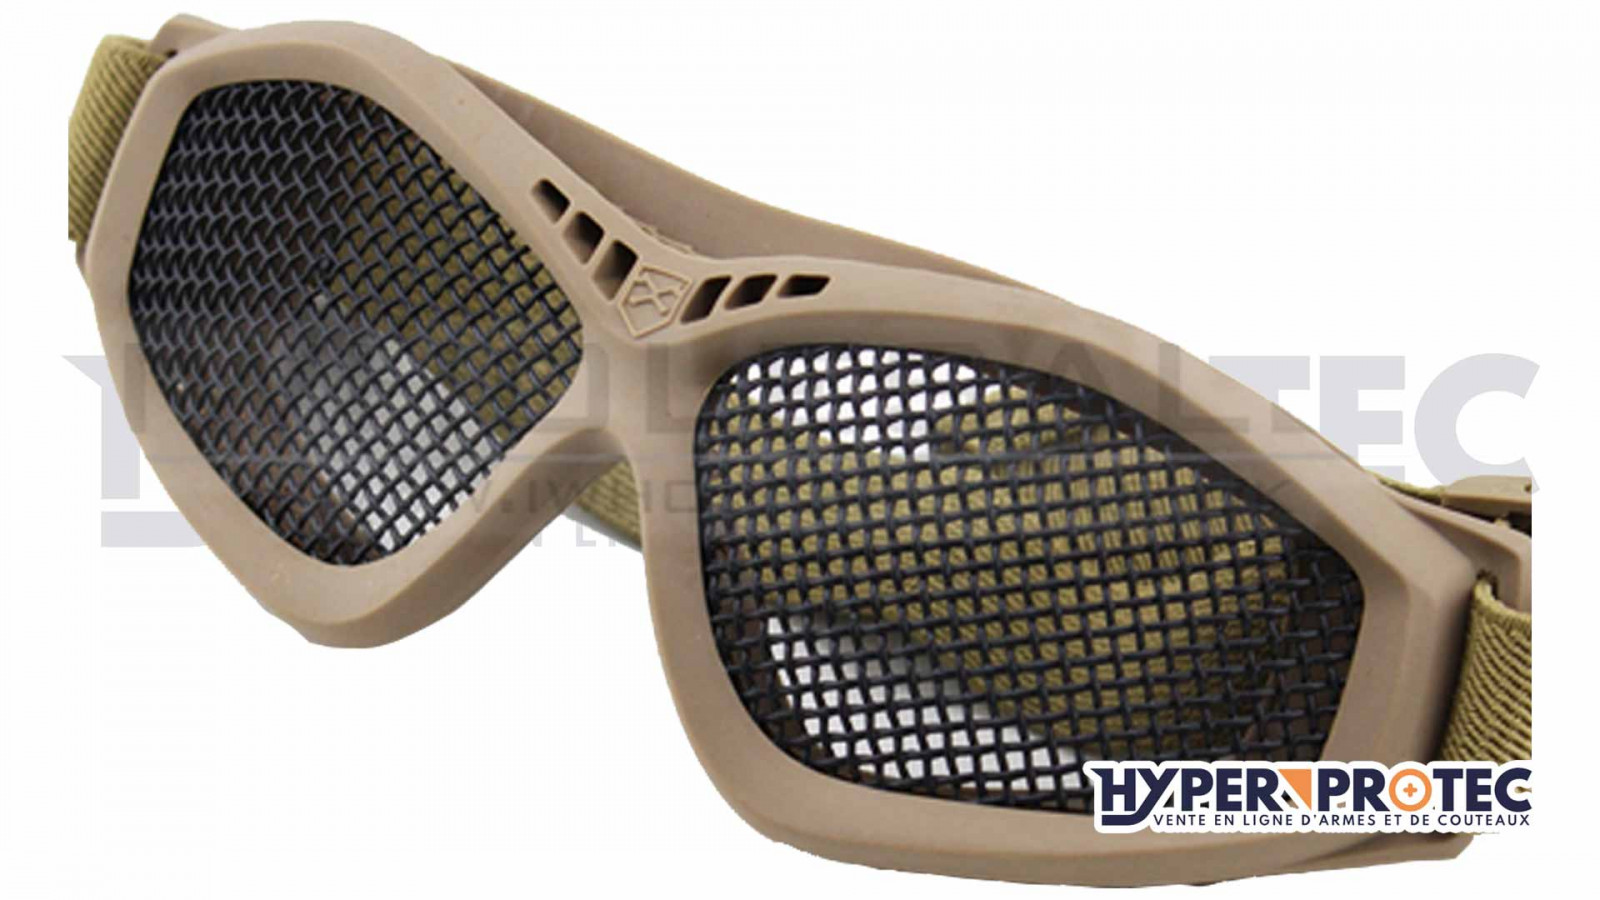 https://www.hyperprotec.com/19866-thickbox_default/big-foot-protect-lunette-grillage-airsoft.jpg